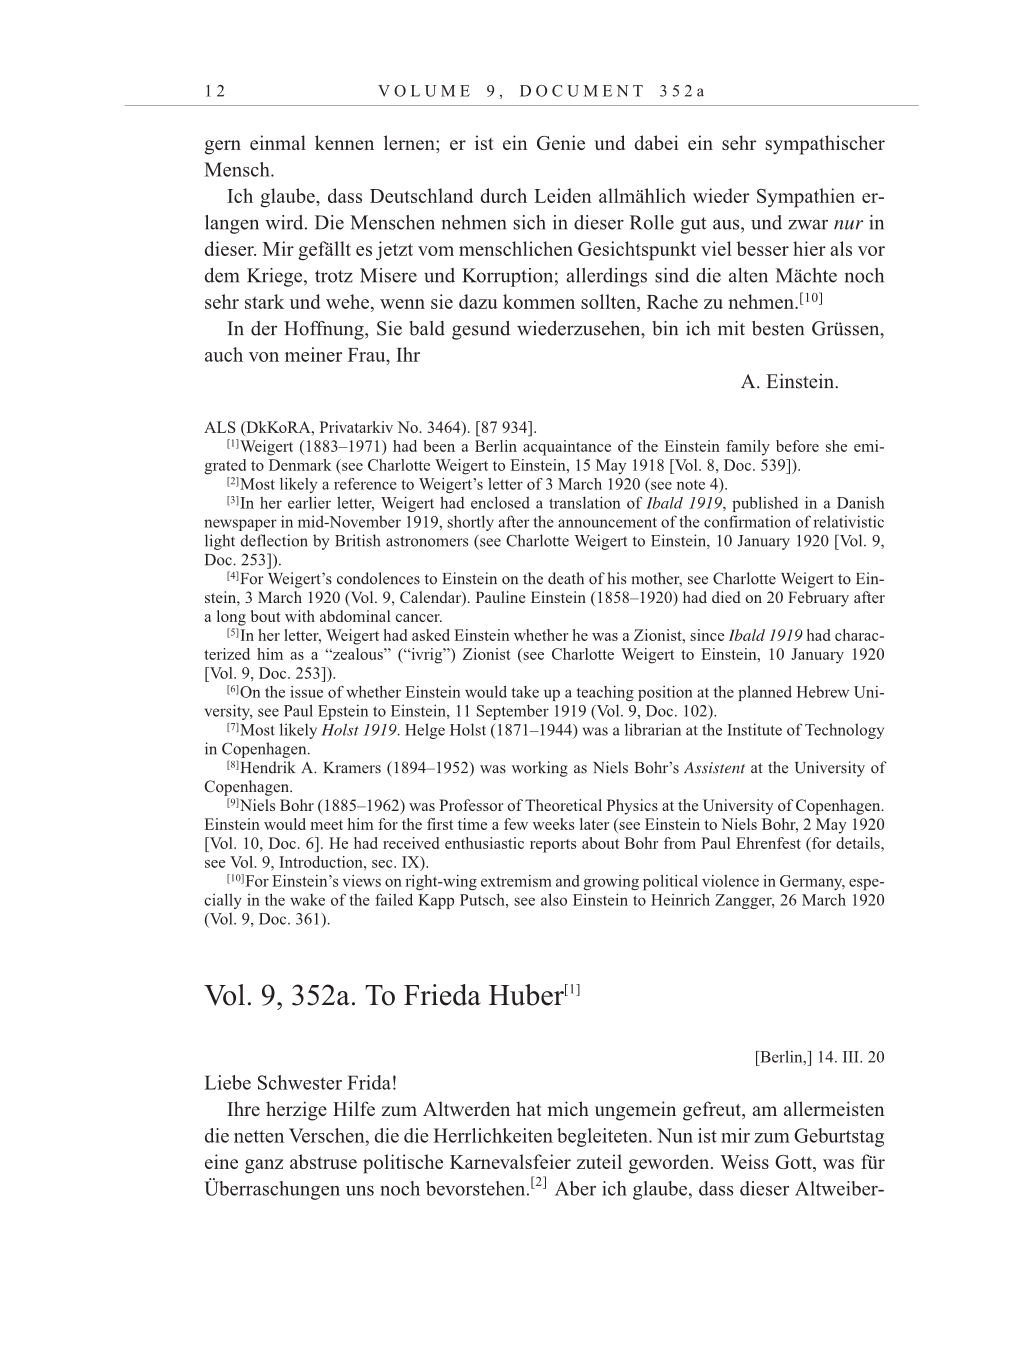 Volume 12: The Berlin Years: Correspondence January-December 1921 page 12